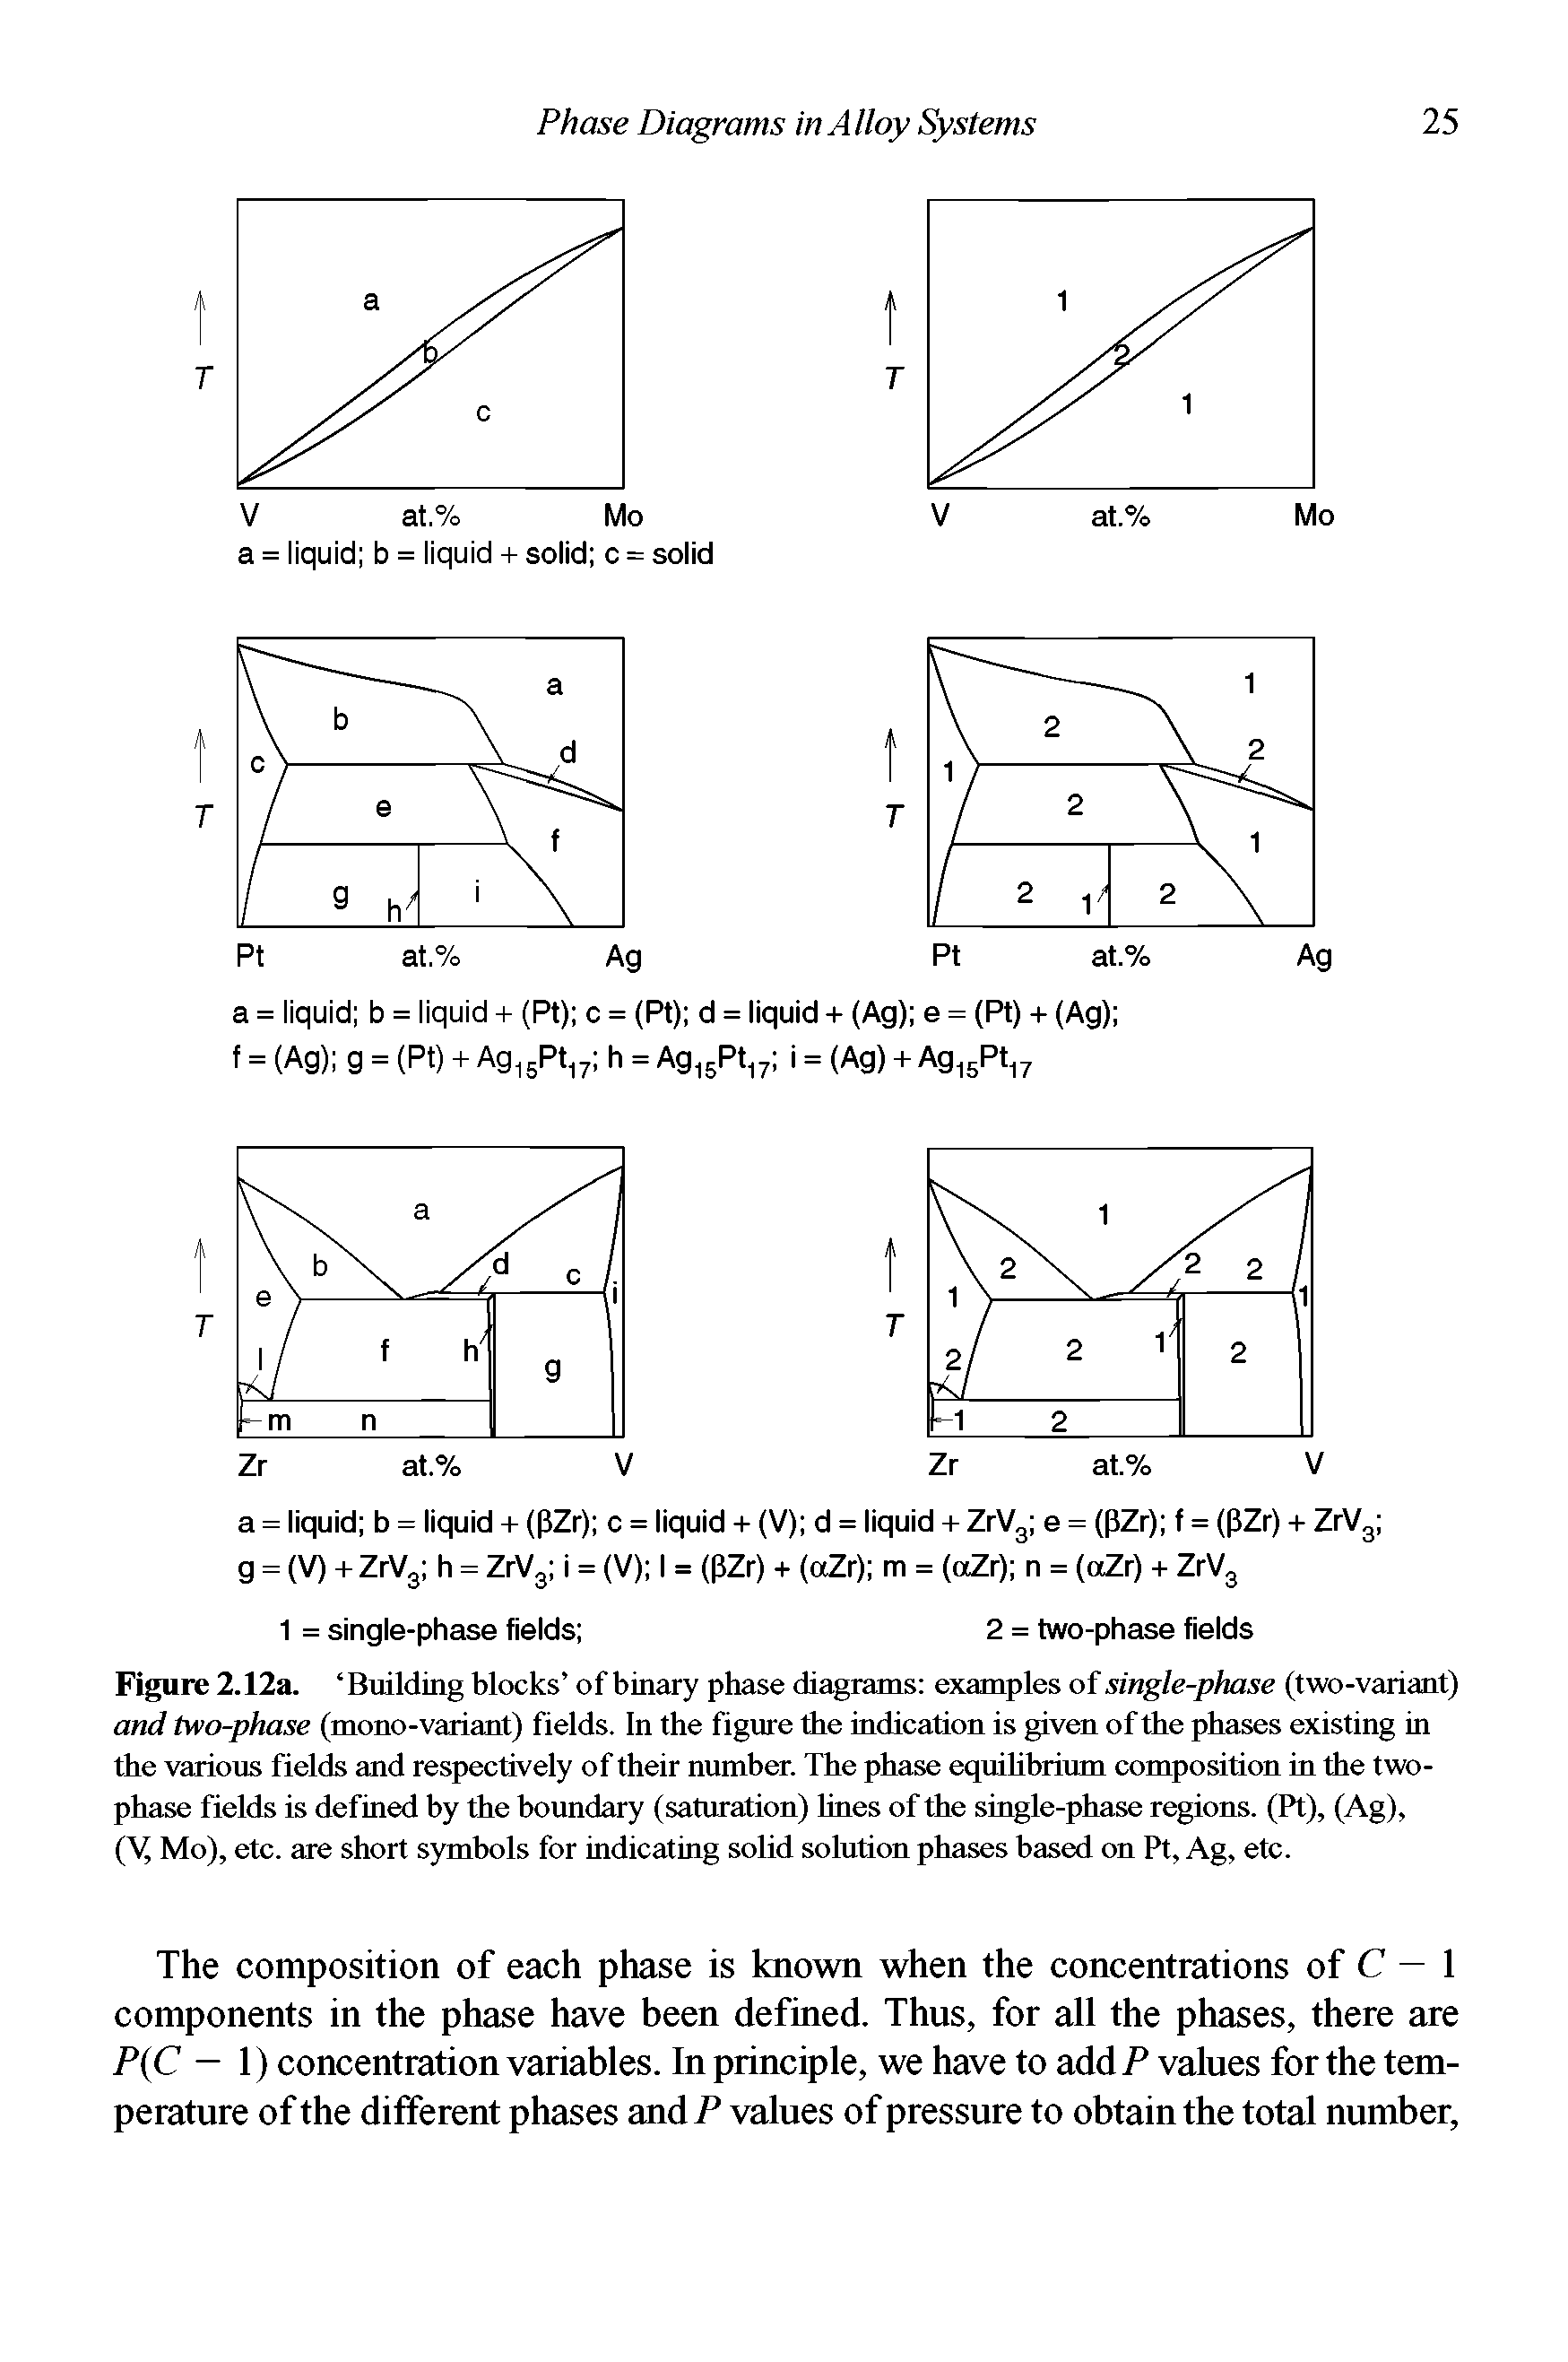 Figure 2.12a. Building blocks of binary phase diagrams examples of single-phase (two-variant) and two-phase (mono-variant) fields. In the figure the indication is given of the phases existing in the various fields and respectively of their number. The phase equilibrium composition in the two-phase fields is defined by the boundary (saturation) lines of the single-phase regions. (Pt), (Ag),...